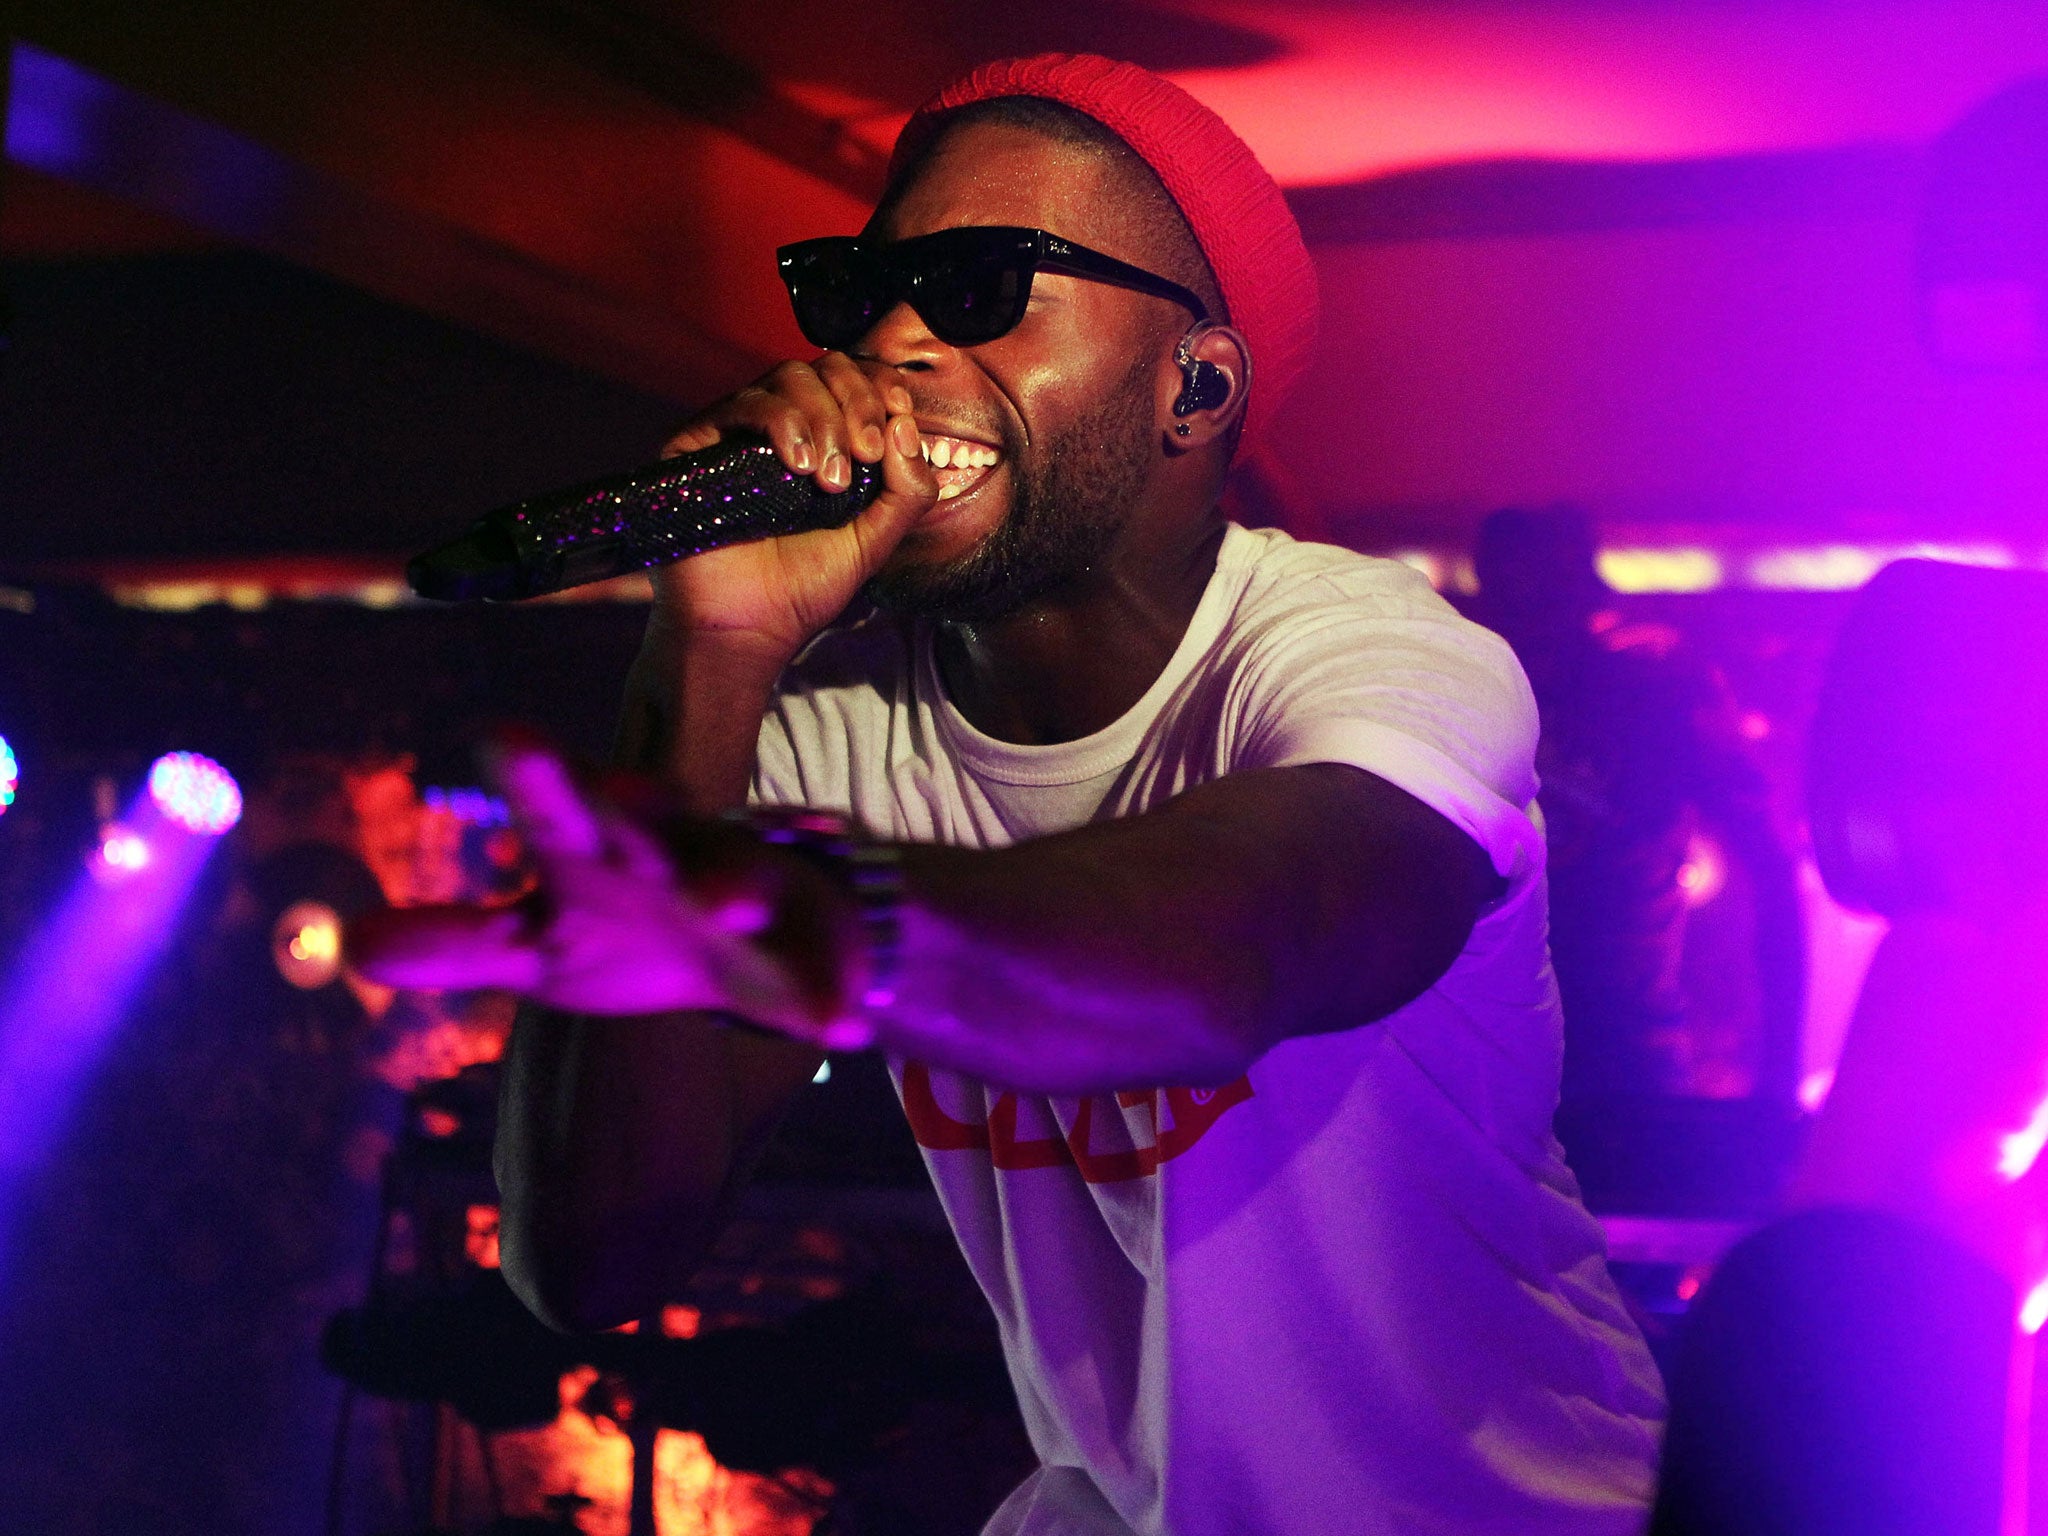 British rapper Tinie Tempah will be performing at Wireless Festival 2014 in London and Birmingham